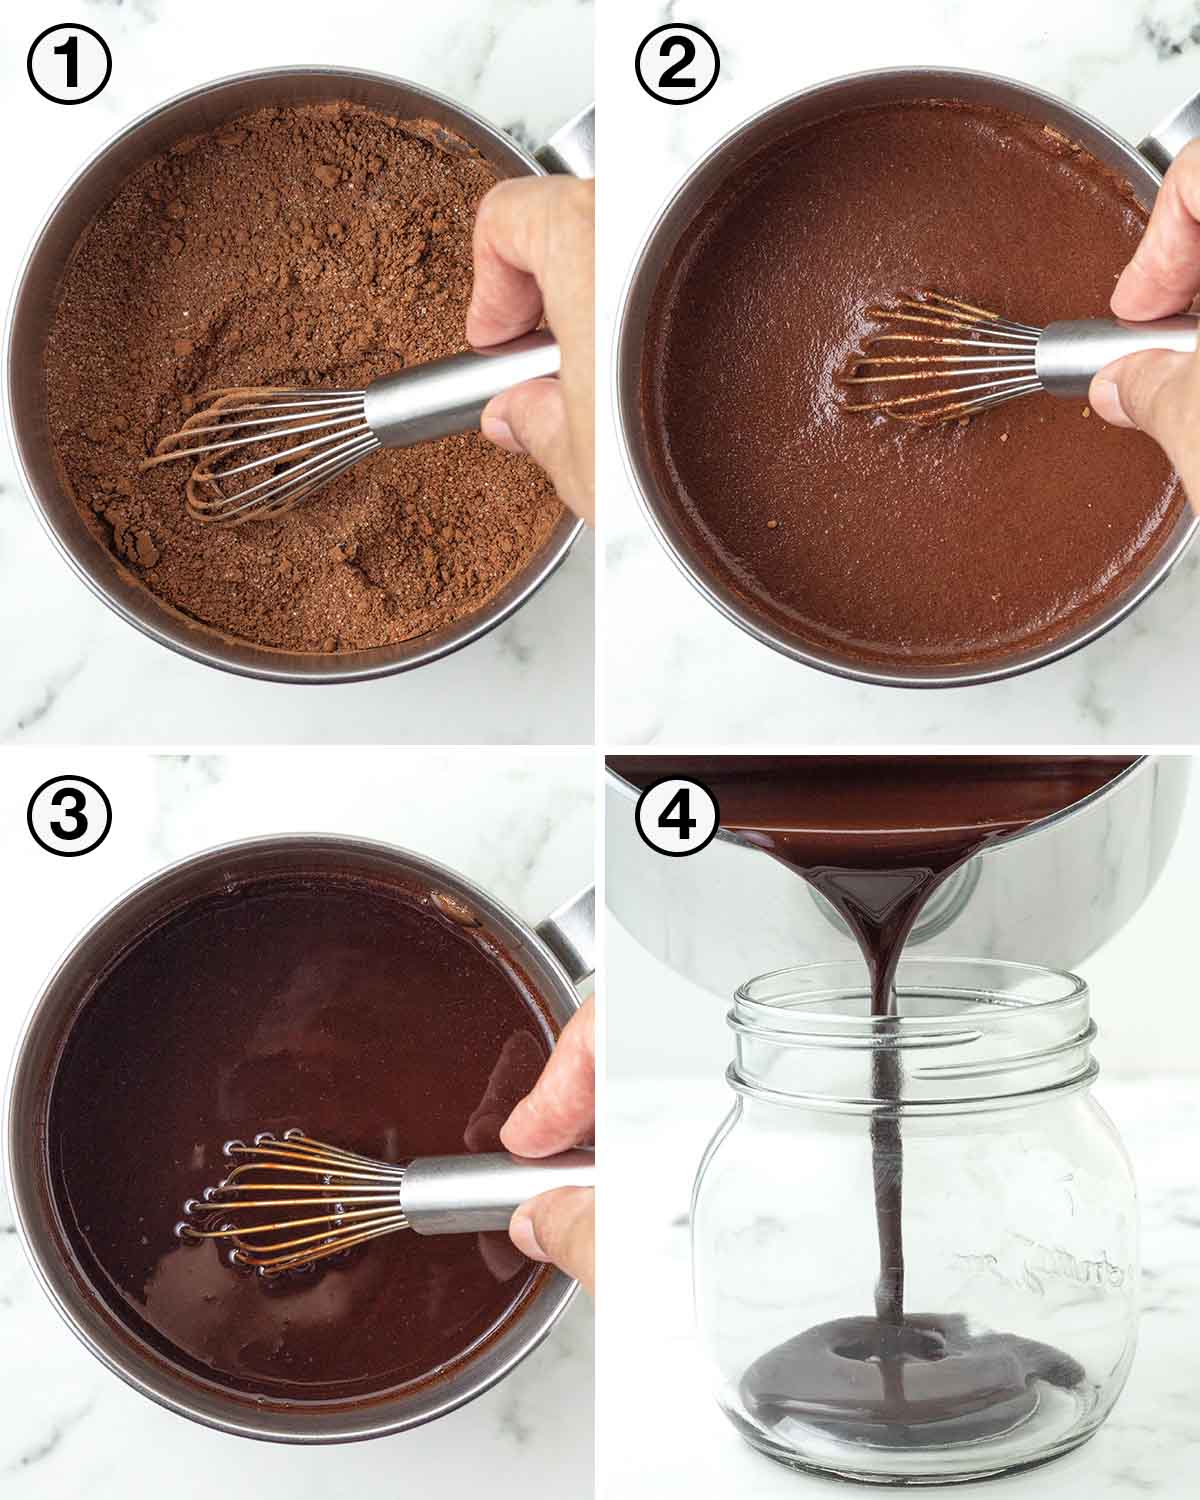 A collage of four images showing the sequence of steps needed to make vegan chocolate syrup.